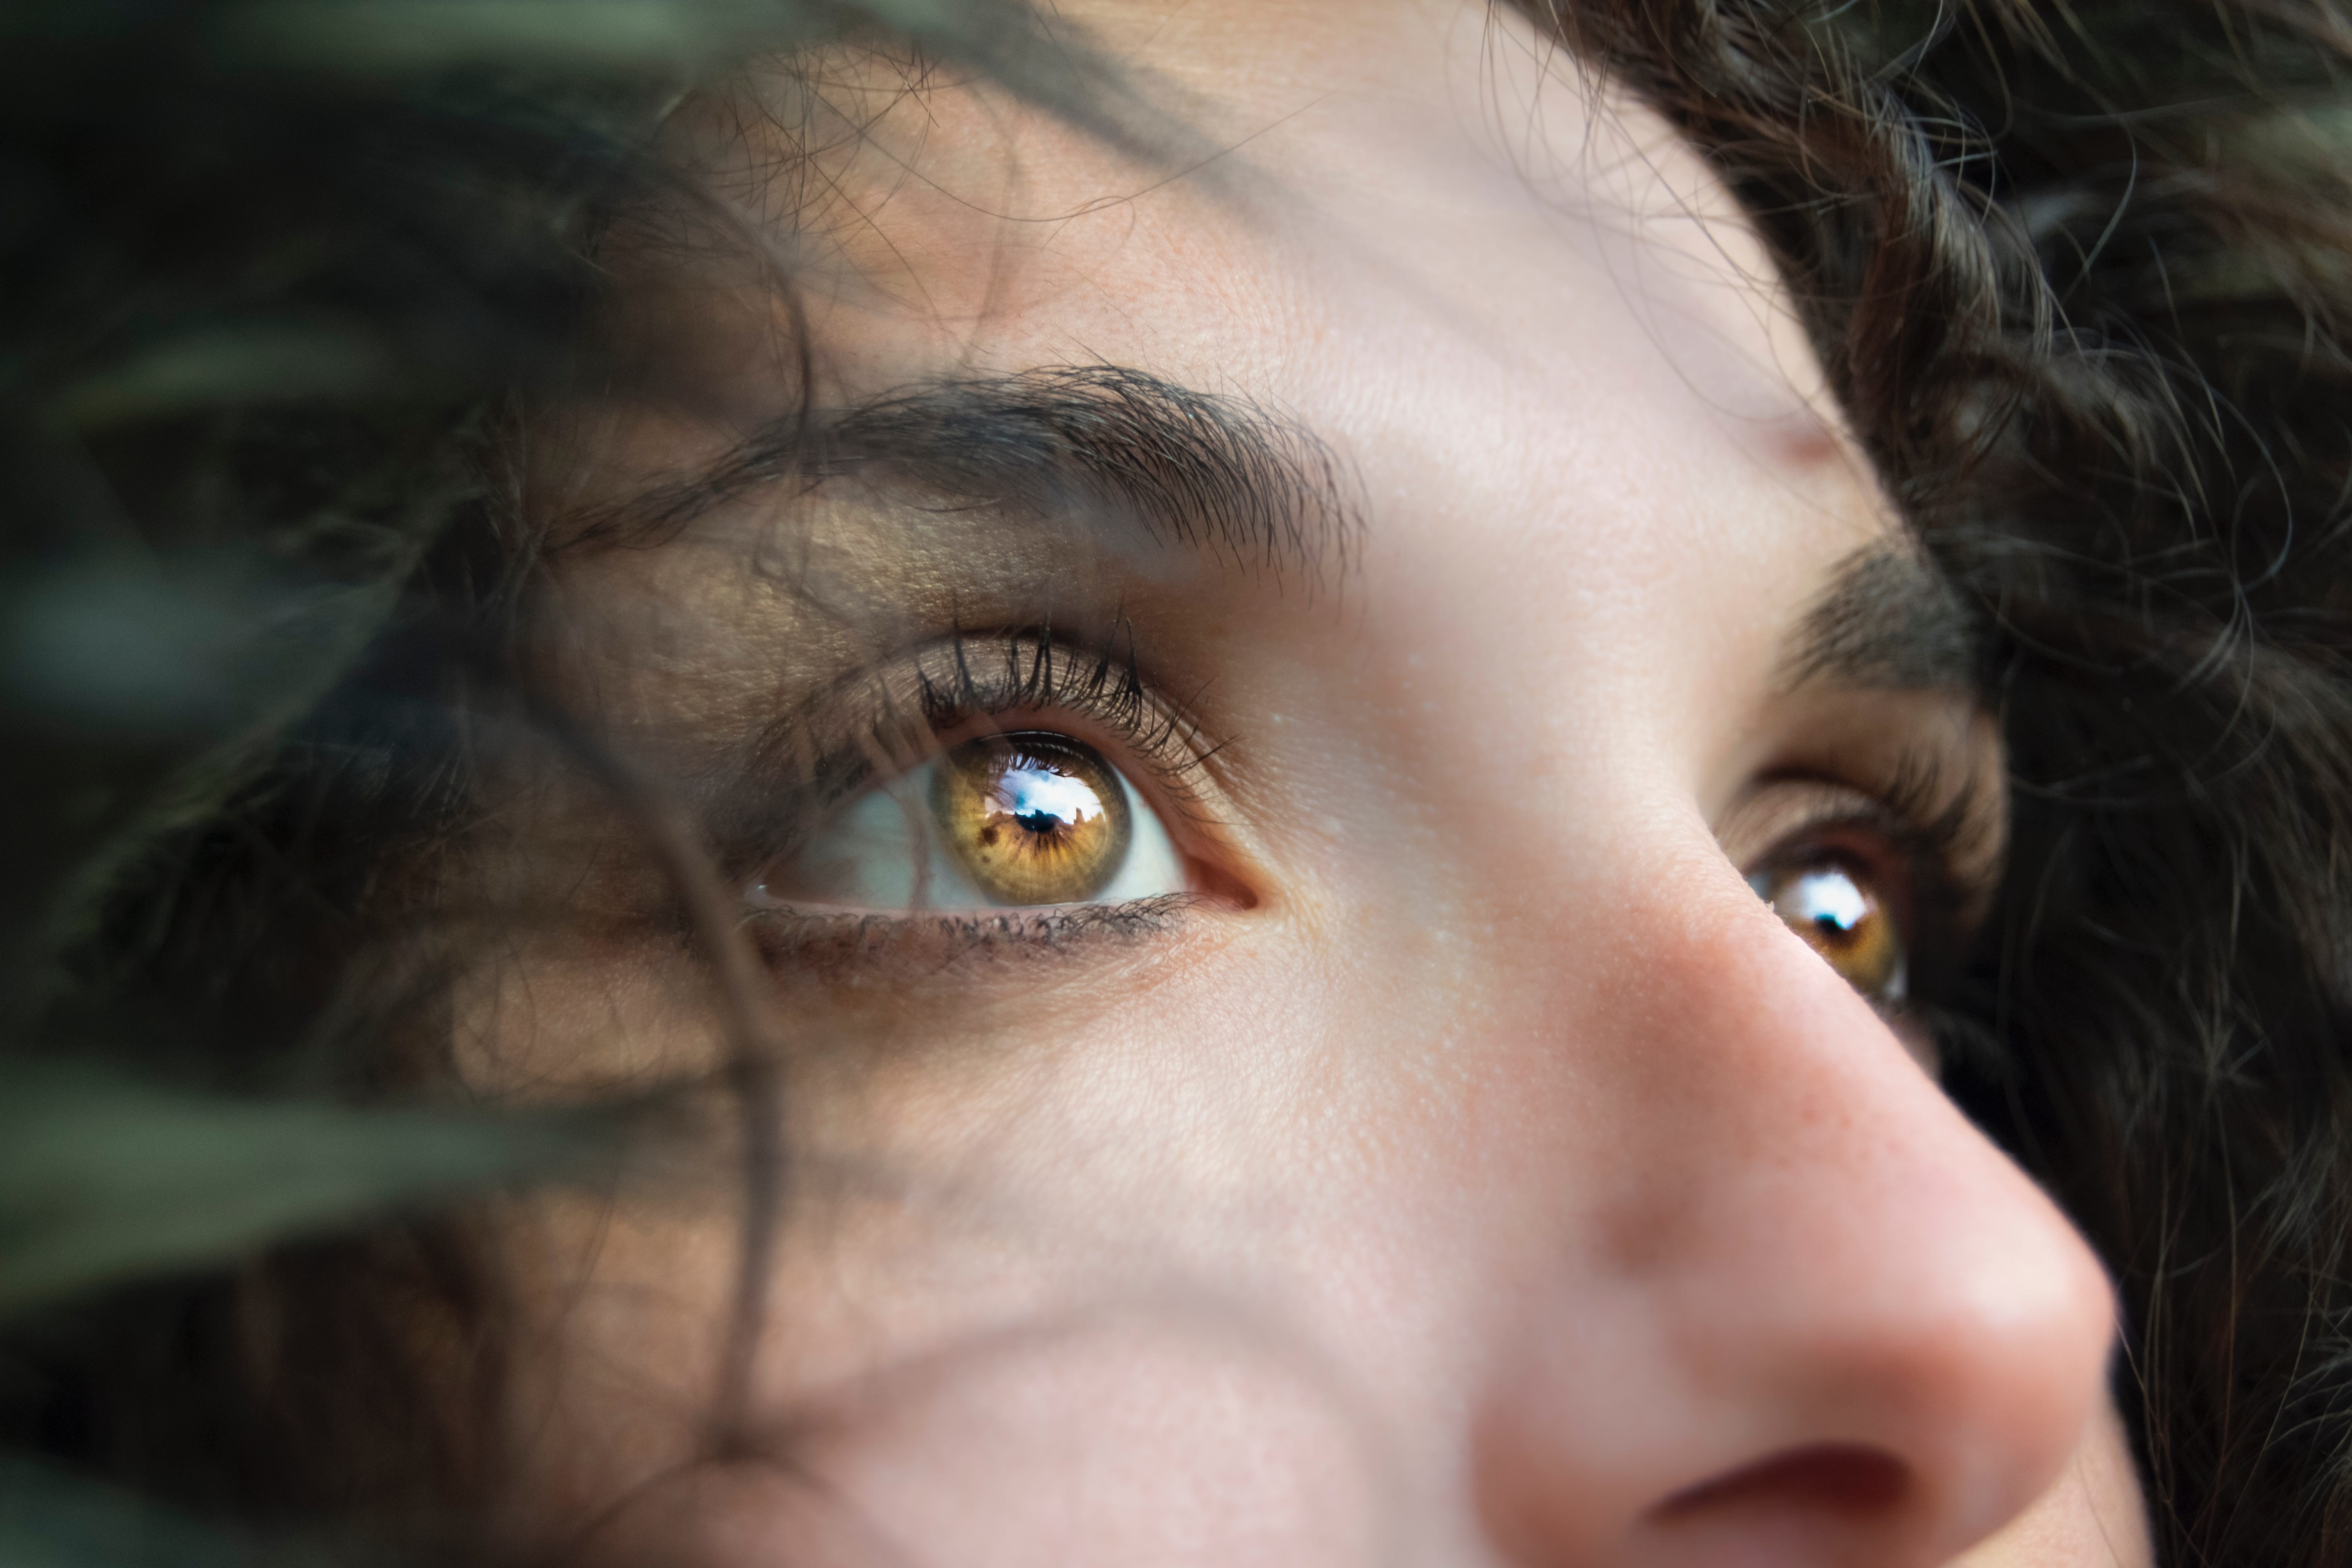 Woman’s face, highlighting nose and eyes; image by Marina Vitale, via Unsplash.com.